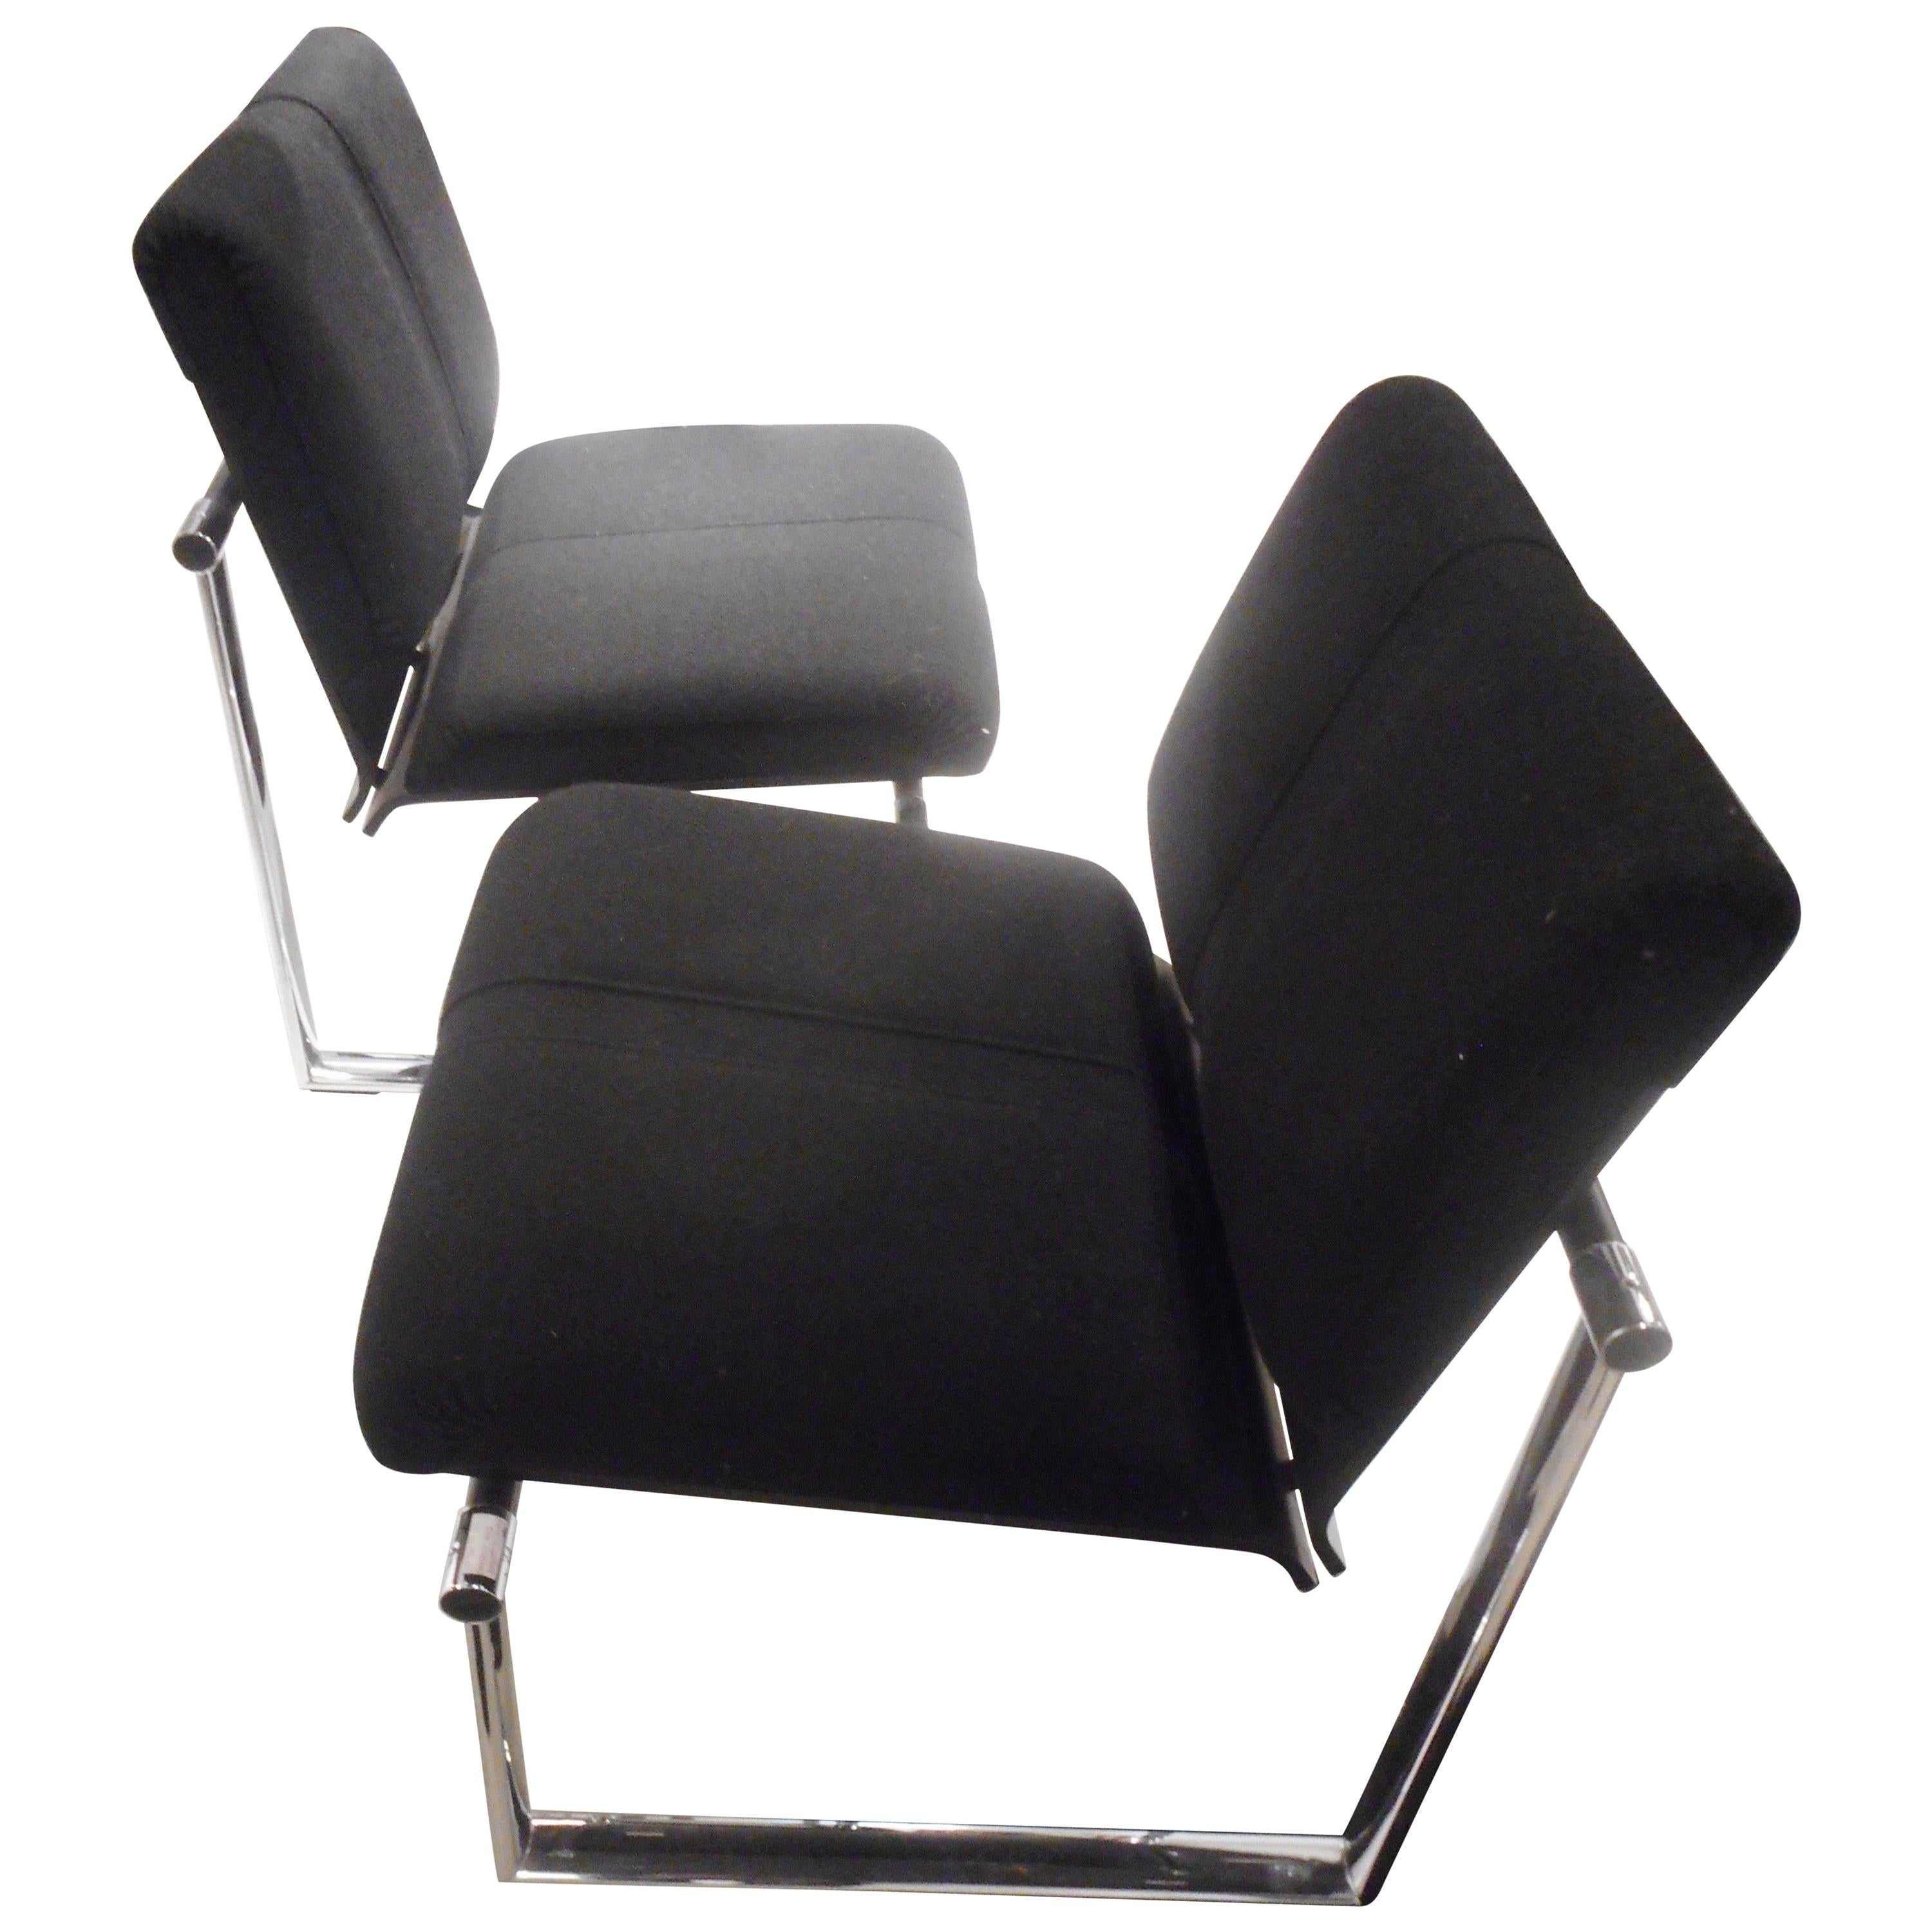 Pair of Black Fabric and Chromed Metal Visitors Chairs by P.Fancelli im Angebot